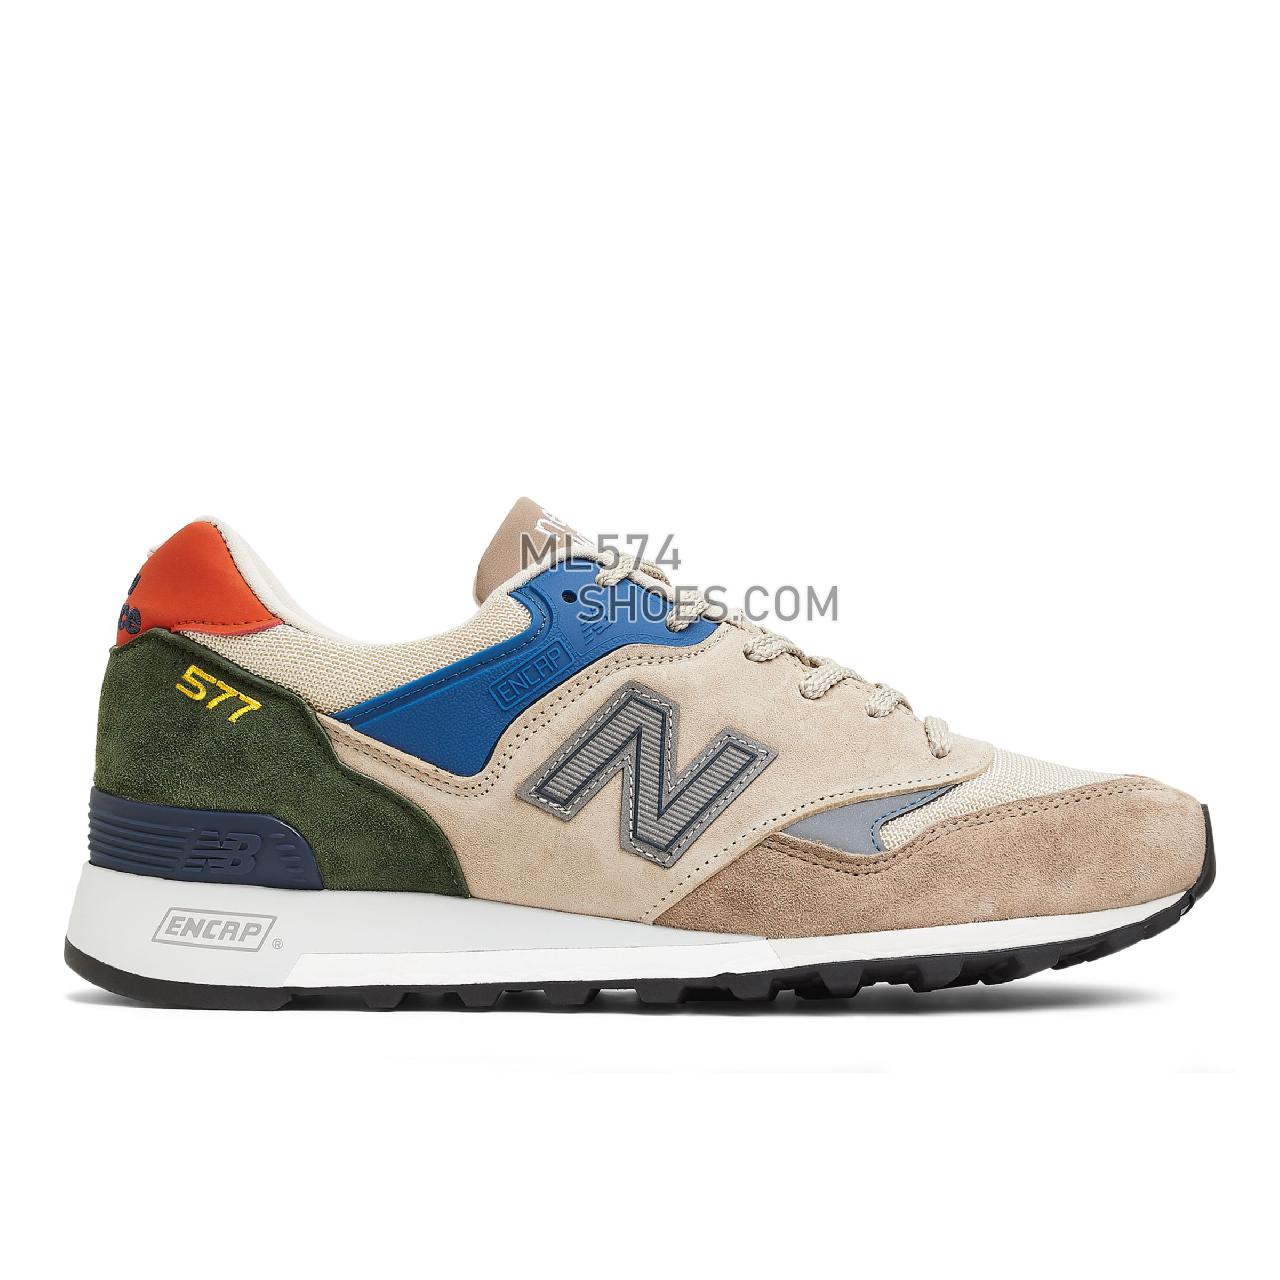 New Balance Made in UK 577 - Men's Made in USA And UK Sneakers - Sand with fungi and blue - M577UPG